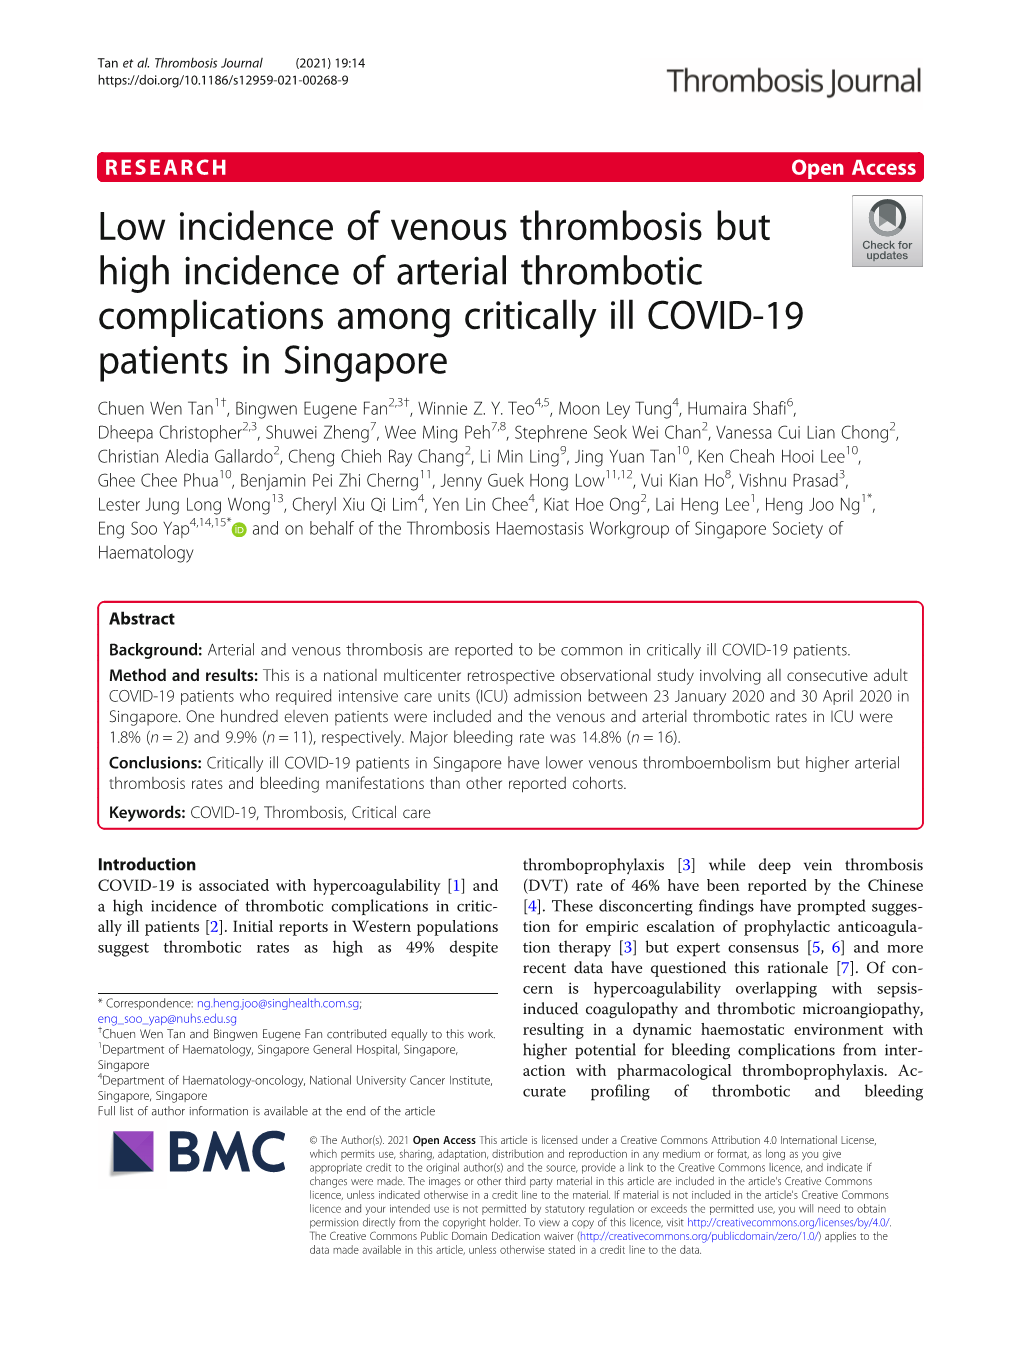 Low Incidence of Venous Thrombosis but High Incidence of Arterial Thrombotic Complications Among Critically Ill COVID-19 Patient